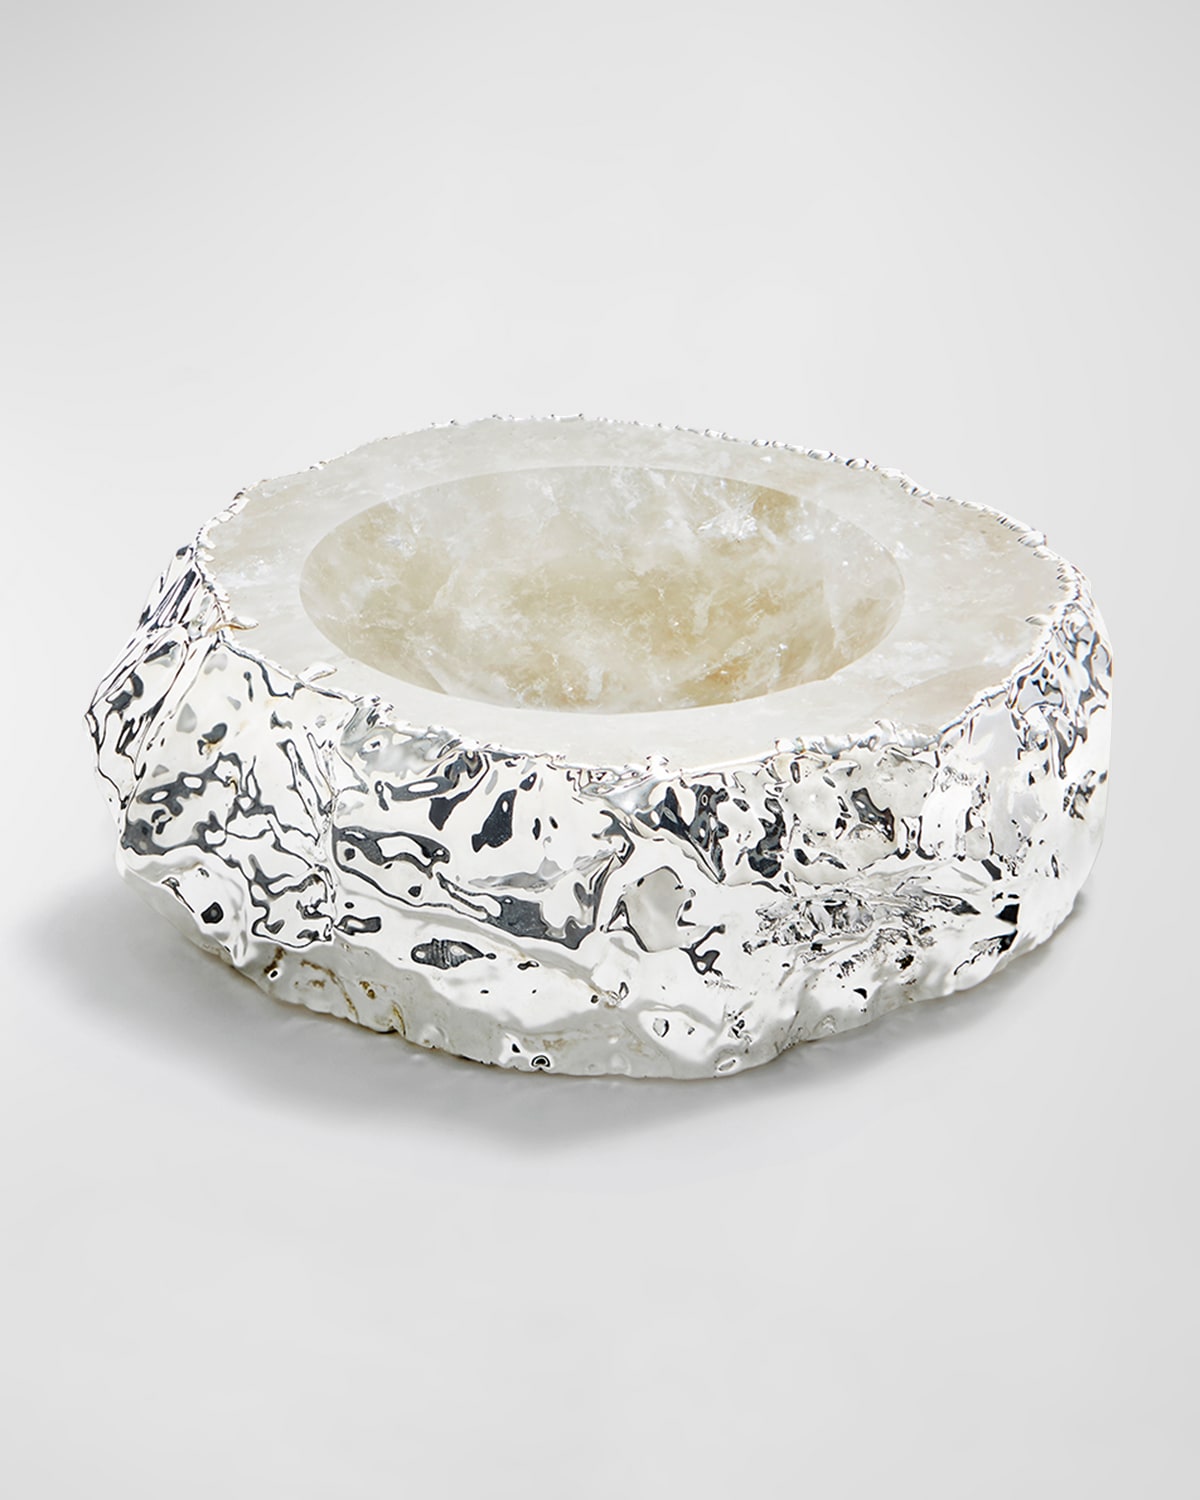 Anna New York Silver Plated Crystal Bowl In Gray